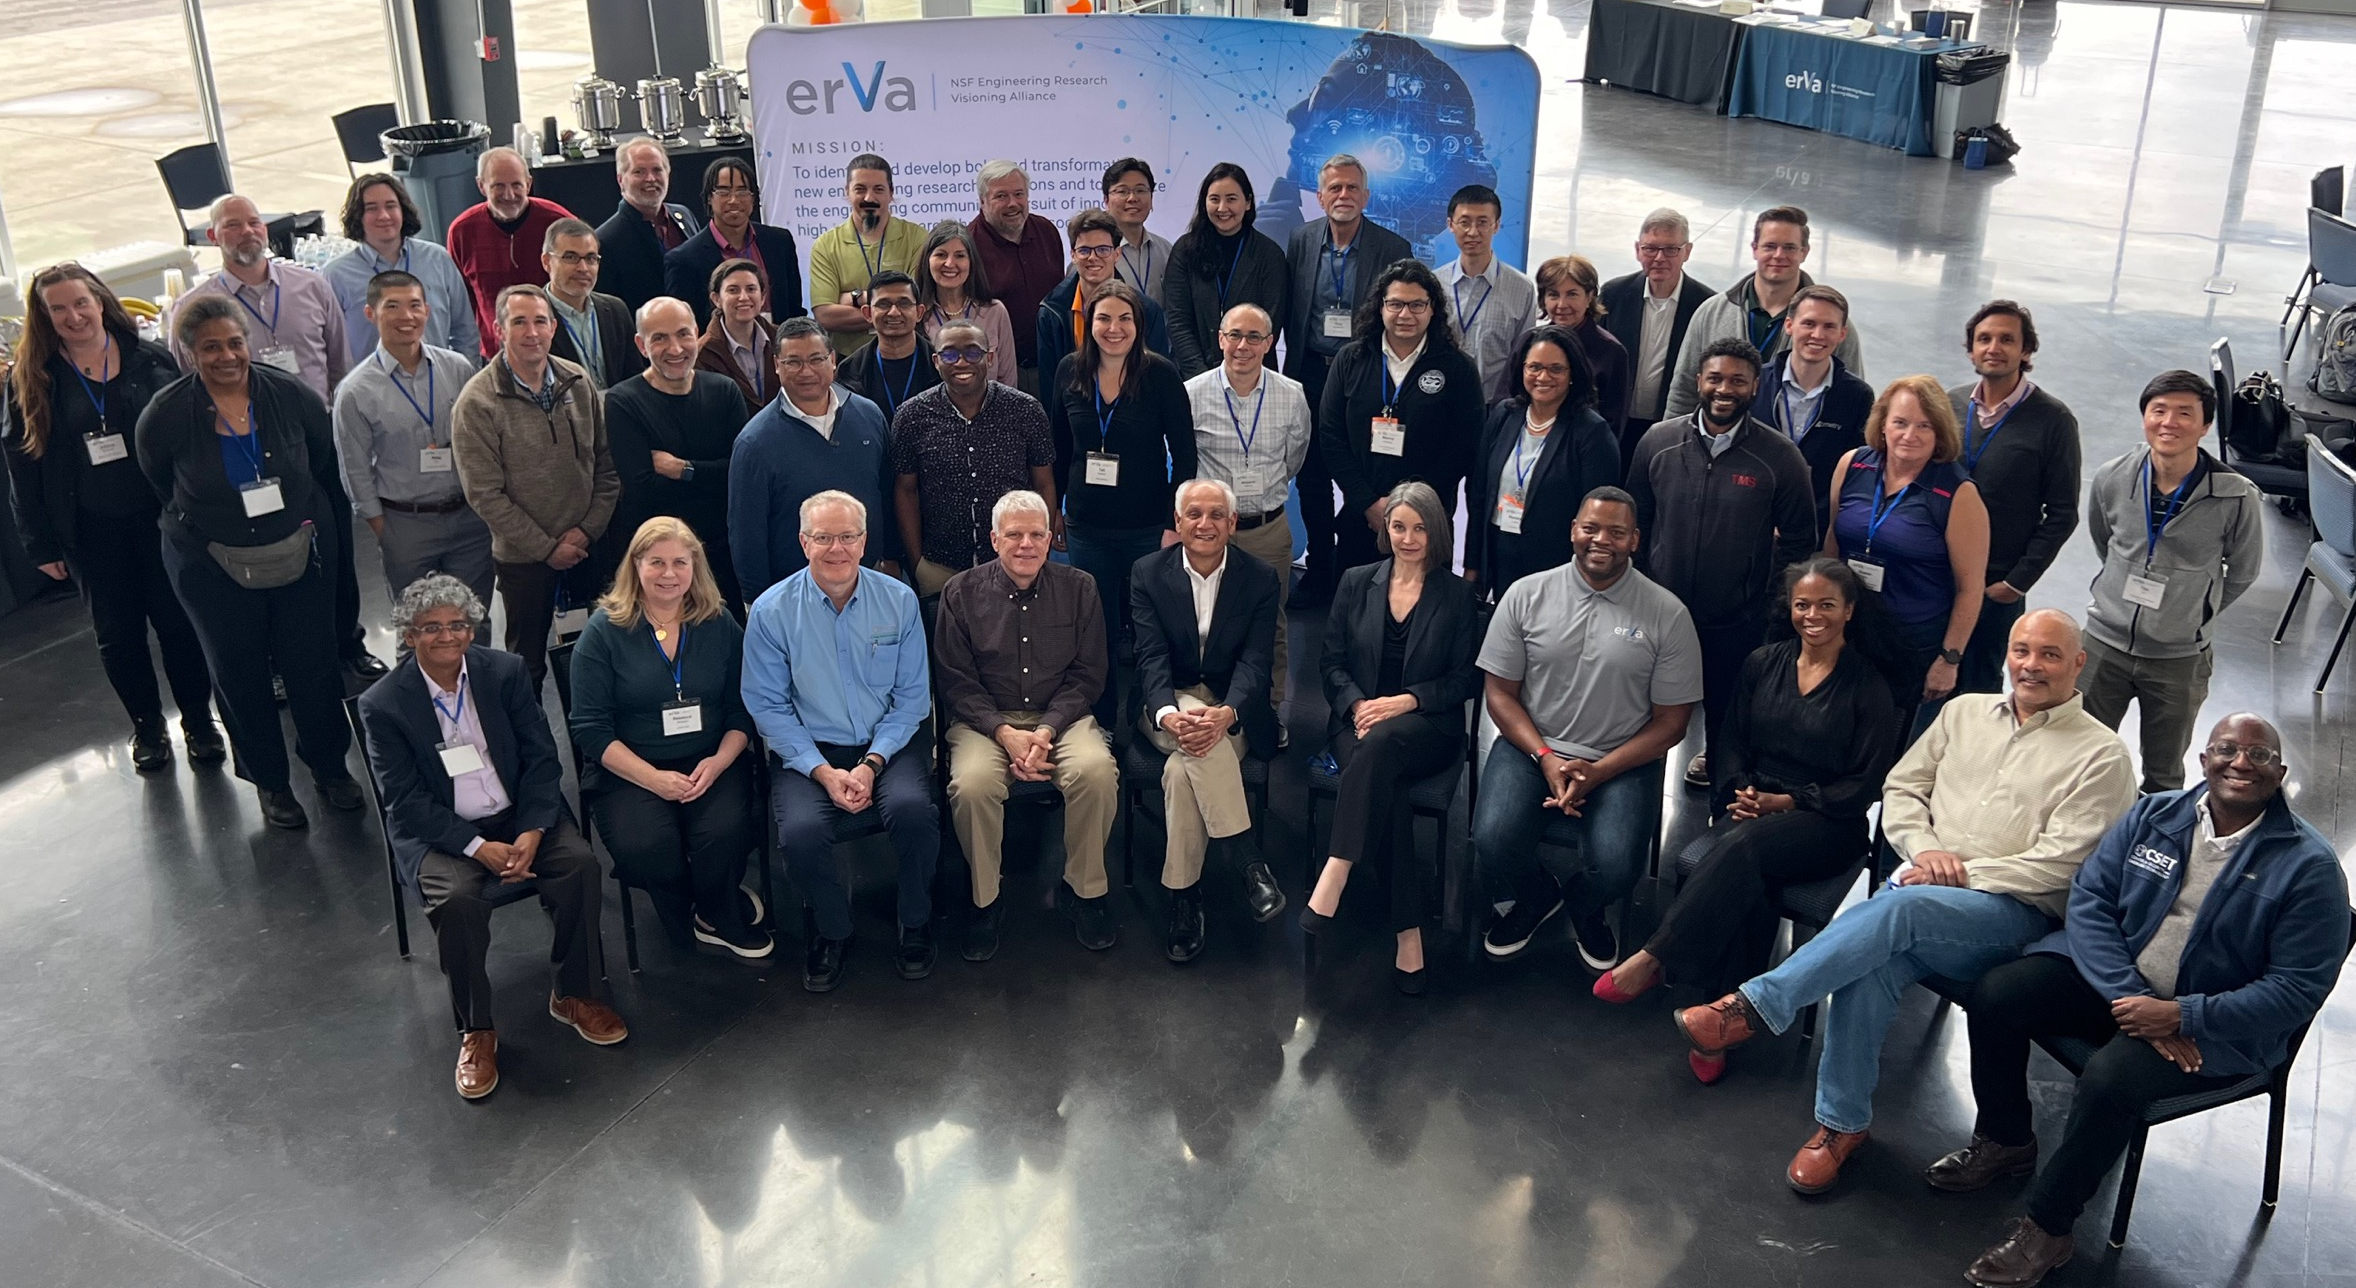 erVa researchers pose for a group photo